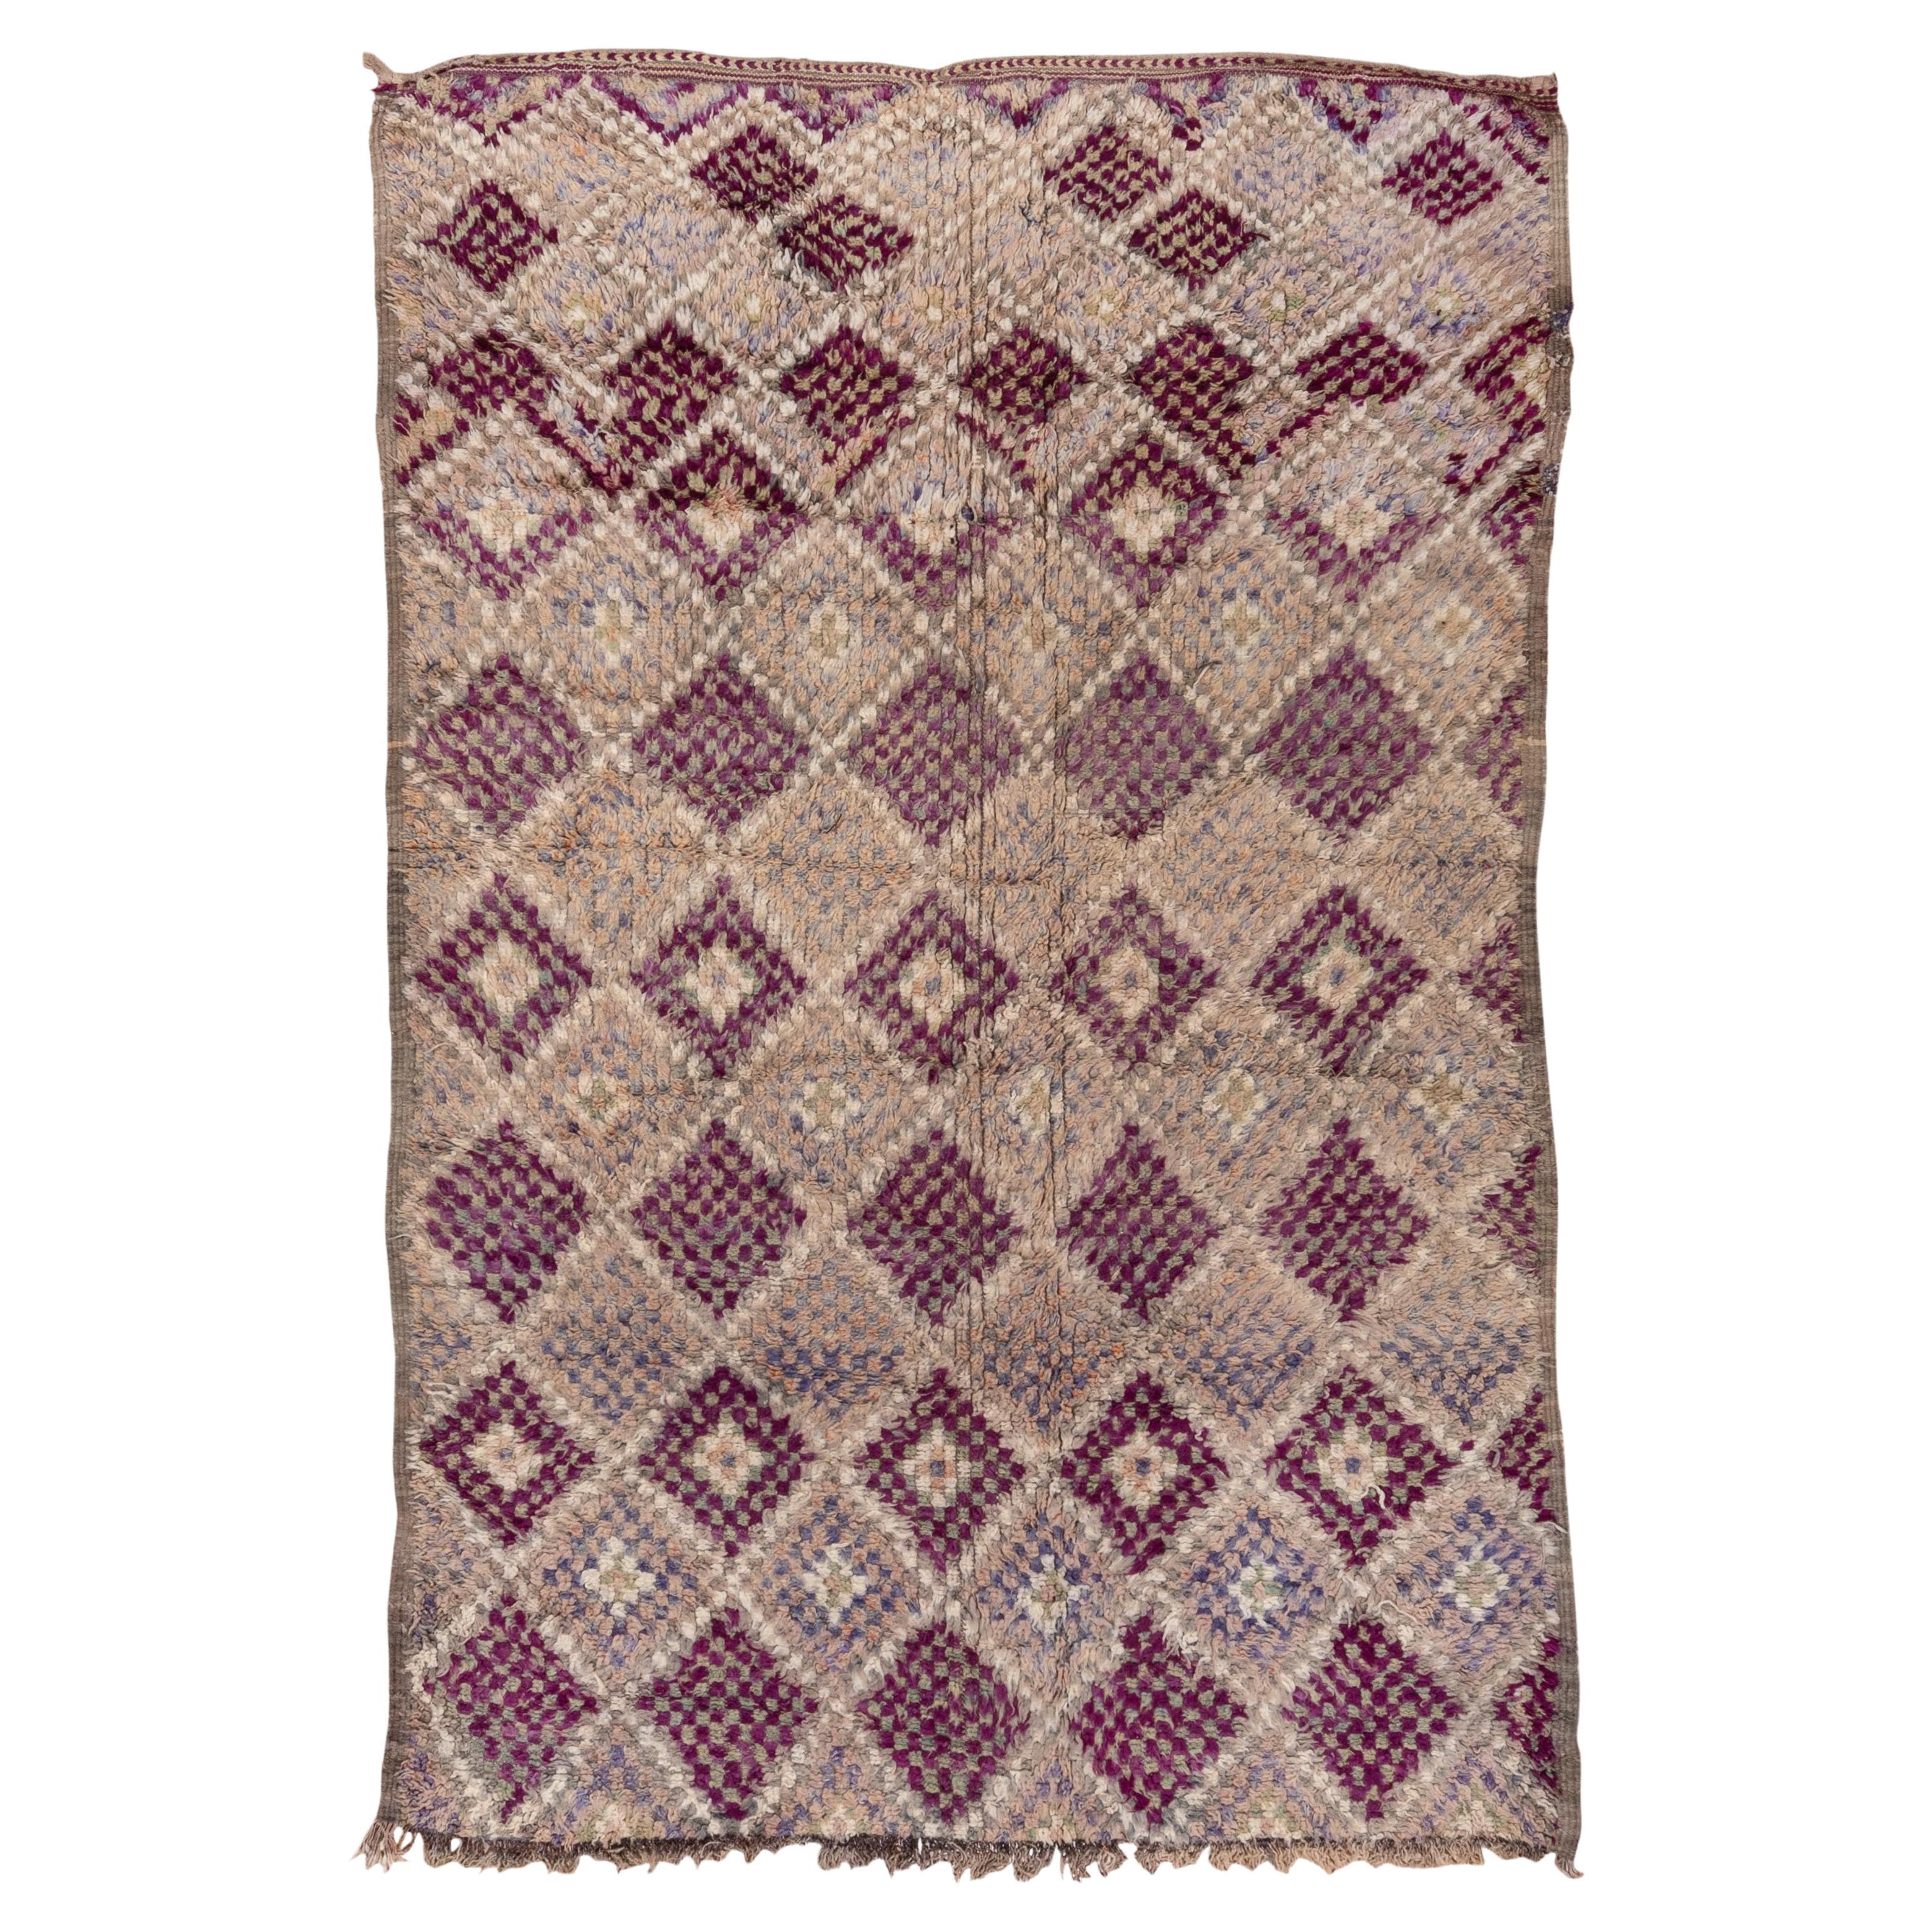 Antique Multitierd Moroccan Diamond Pattern Rug in Faded Purple and Creamy Brown For Sale